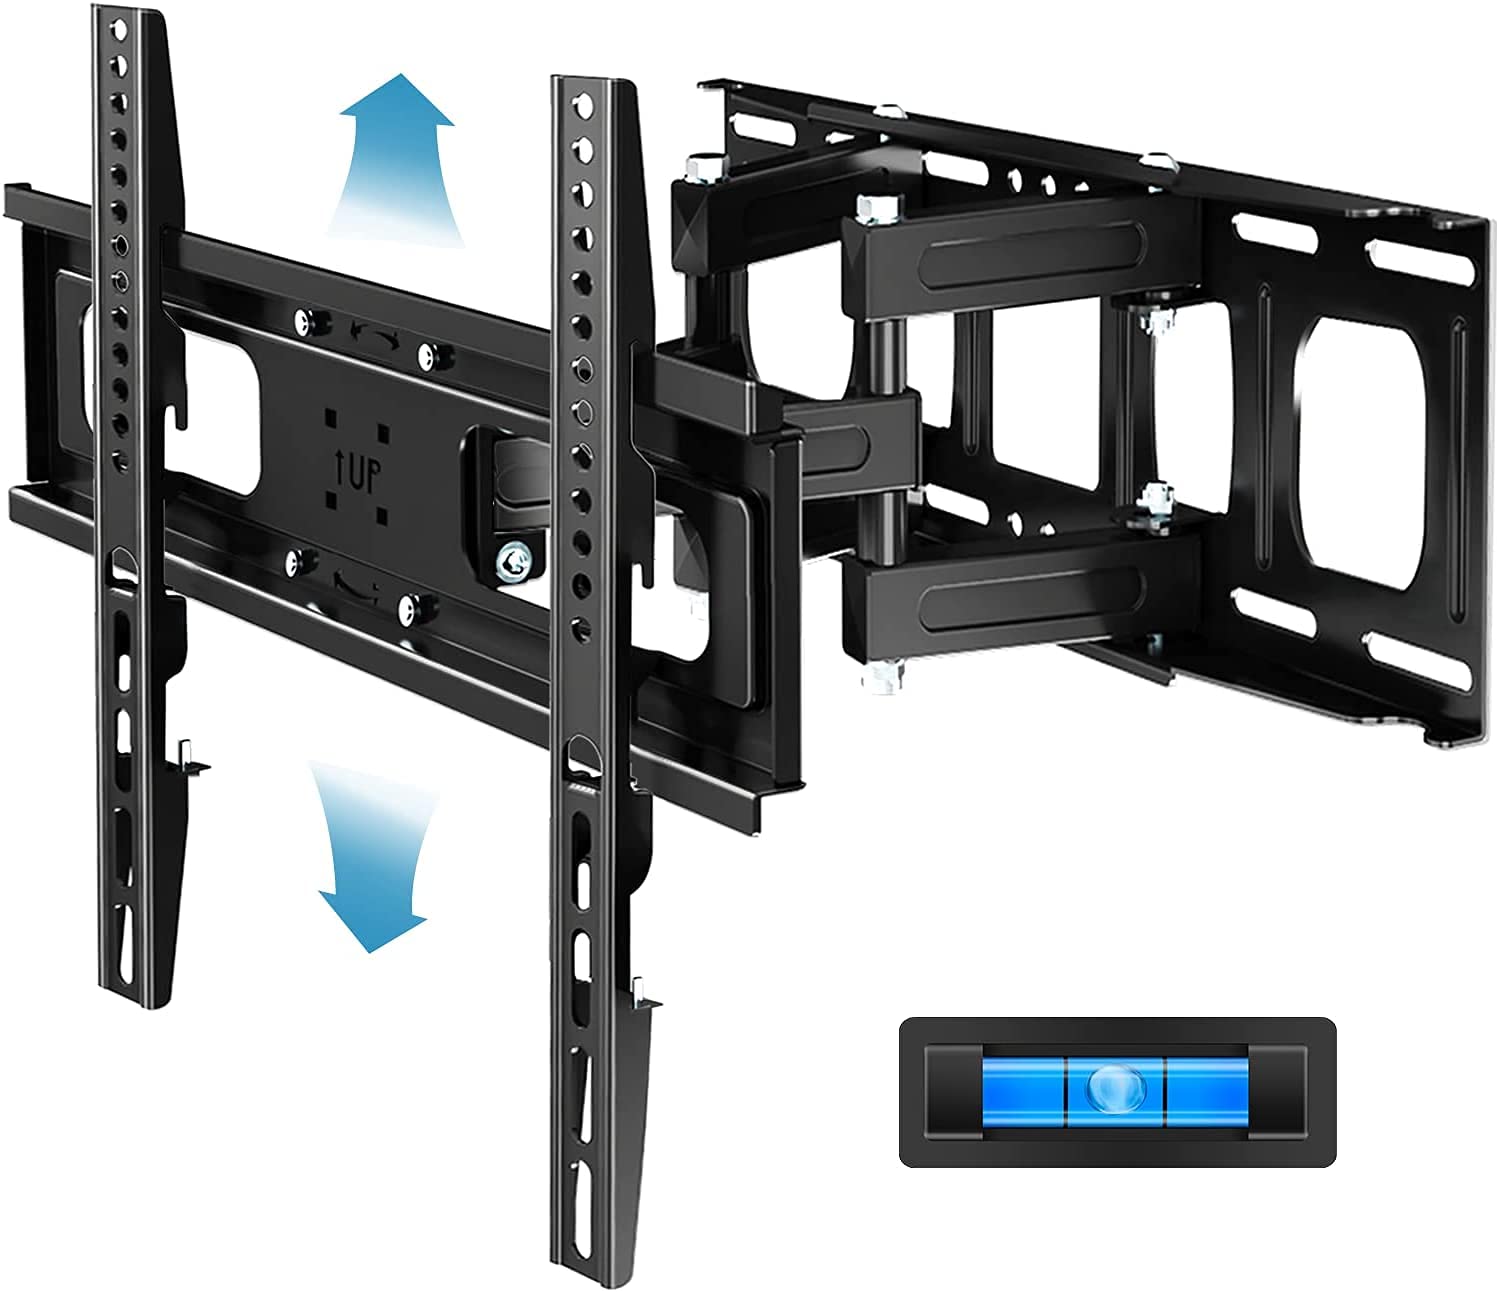 Everstone Full Motion TV Wall Mount with Height Adjustment for Most 28-70 inch LED, LCD, OLED Flat&Curved TVs, up to 121lbs, Max VESA 400x400mm, 16